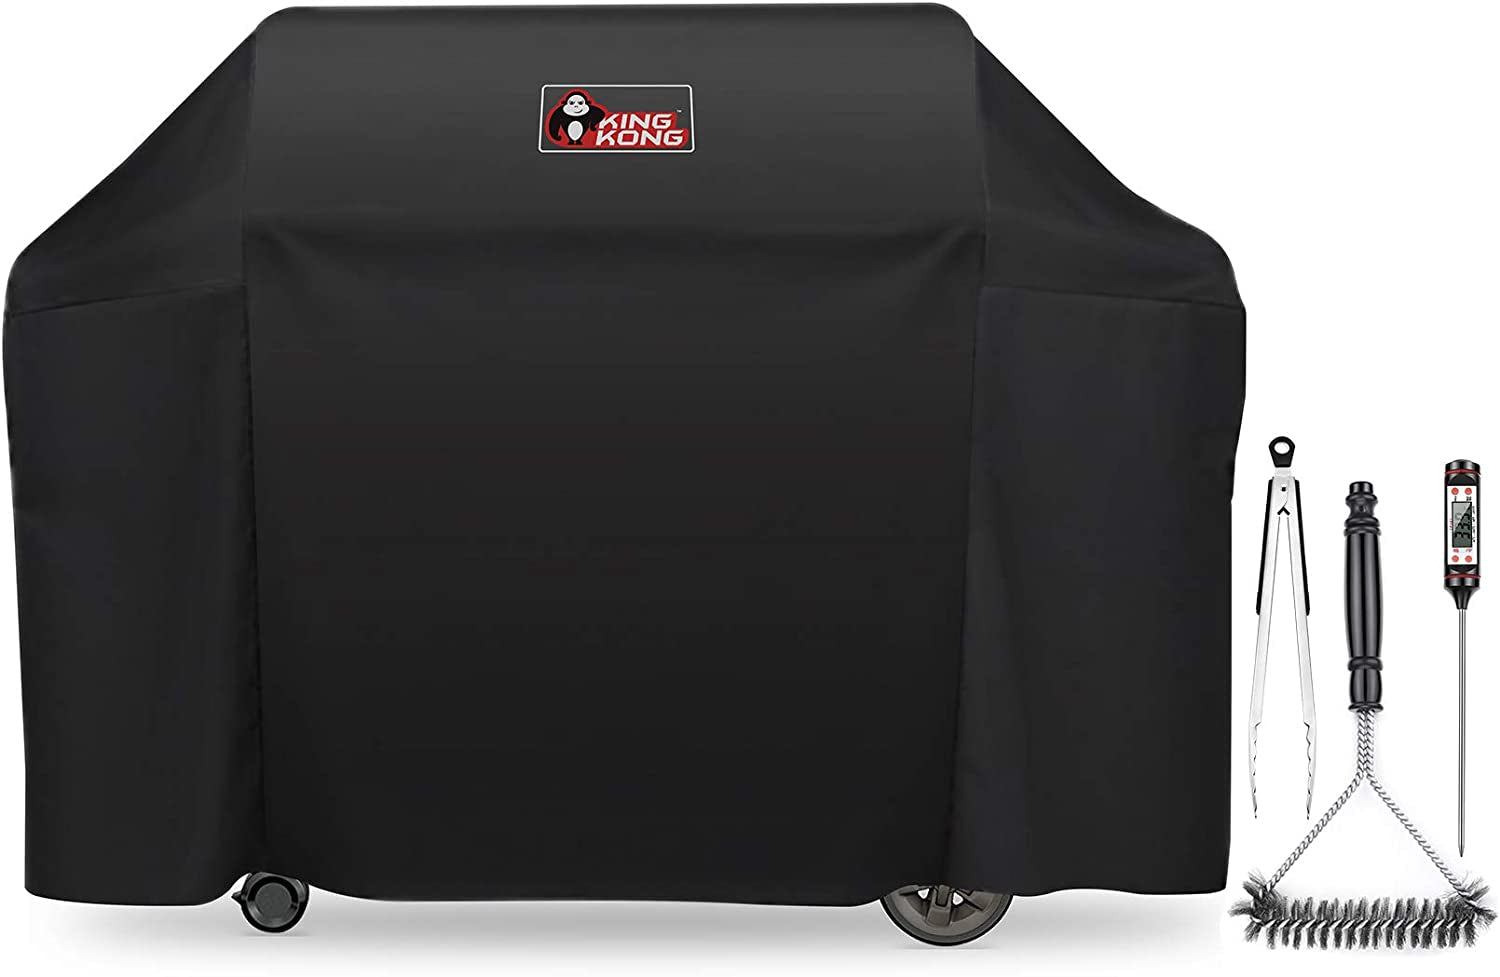 Kingkong, Kingkong 7131 Grill Cover for Weber Genesis II 4 Burner Grill Including Brush, Tongs and Thermometer